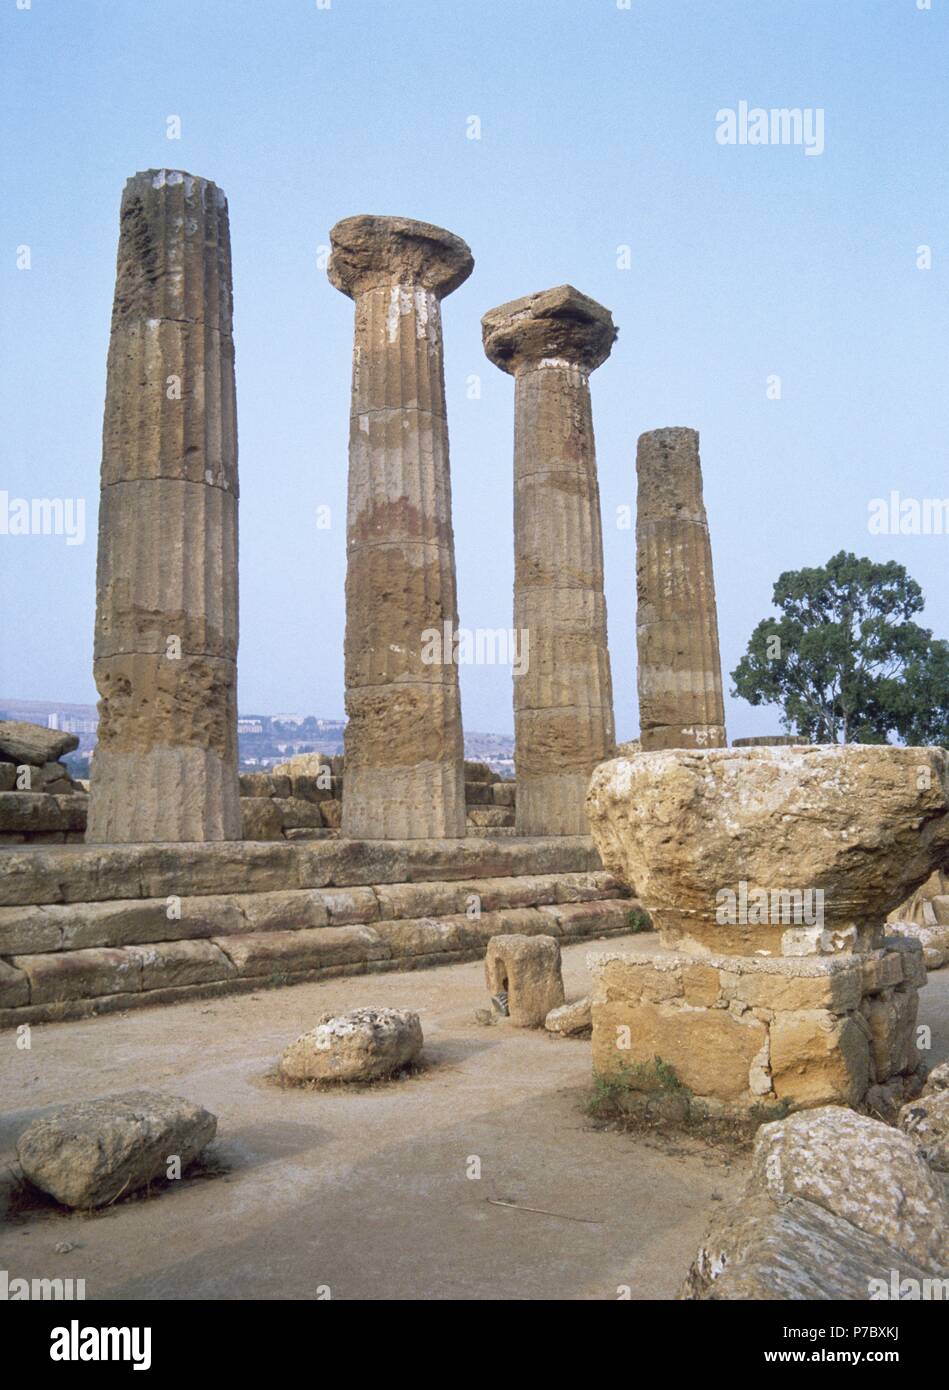 Italy. Sicily. Agrigento. Valley of the Temples. Temple of Heracles. 6th century BC. Doric style. UNESCO World Heritage Site. Stock Photo